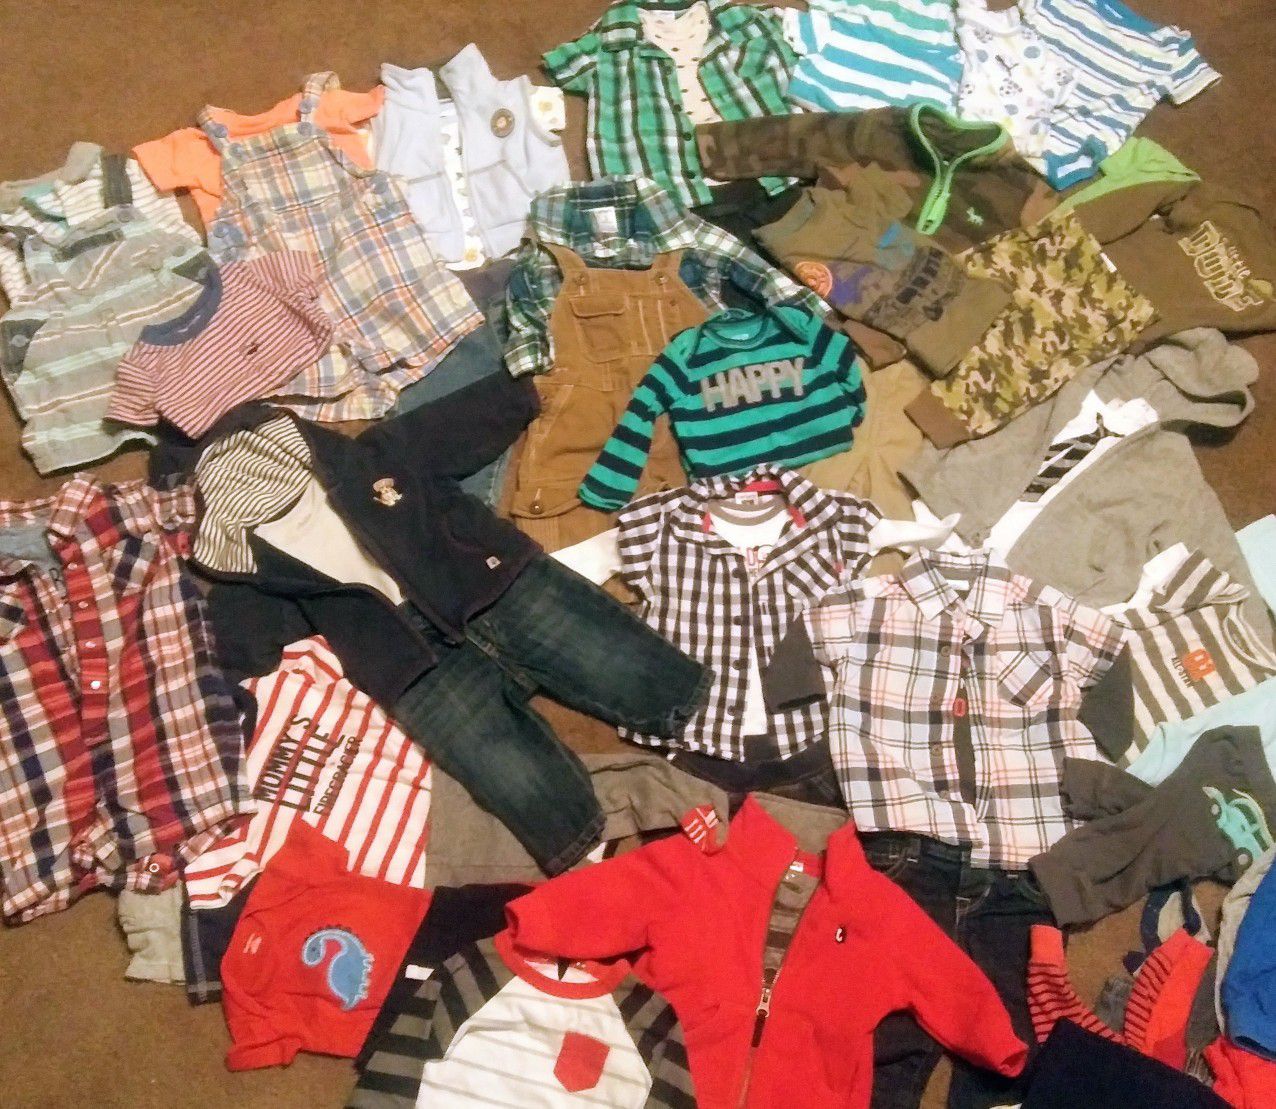 Name brand baby boy clothing lot sizes newborn to 6 months over 100 pieces and small diaper bag with misc. Items included